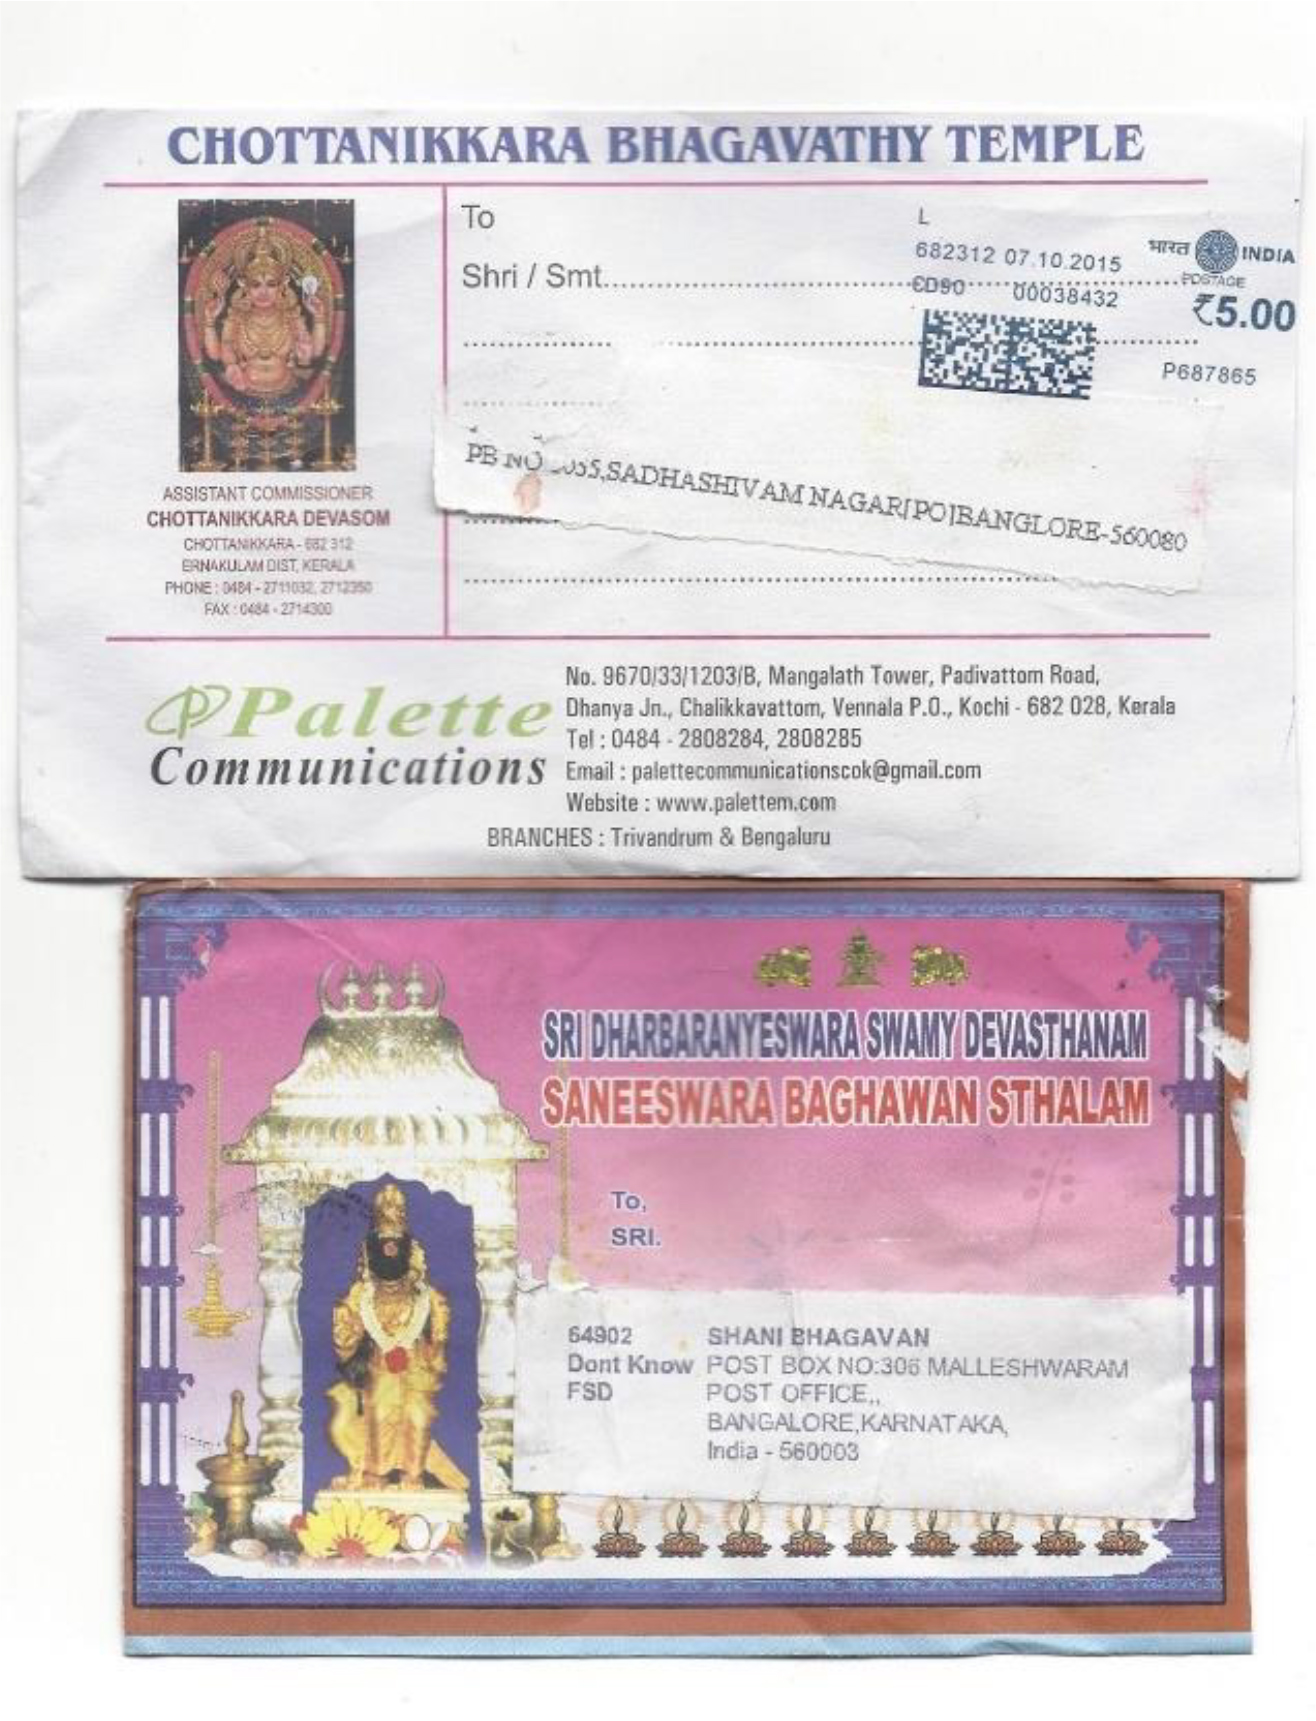 The pictures of two envelopes from two different temples are seen here. One for Chottanikkara Bhagavathy temple and the other for Sri Dharbaranyeswara Swamy Devasthanam Saneeswara Baghawan Sthalam.